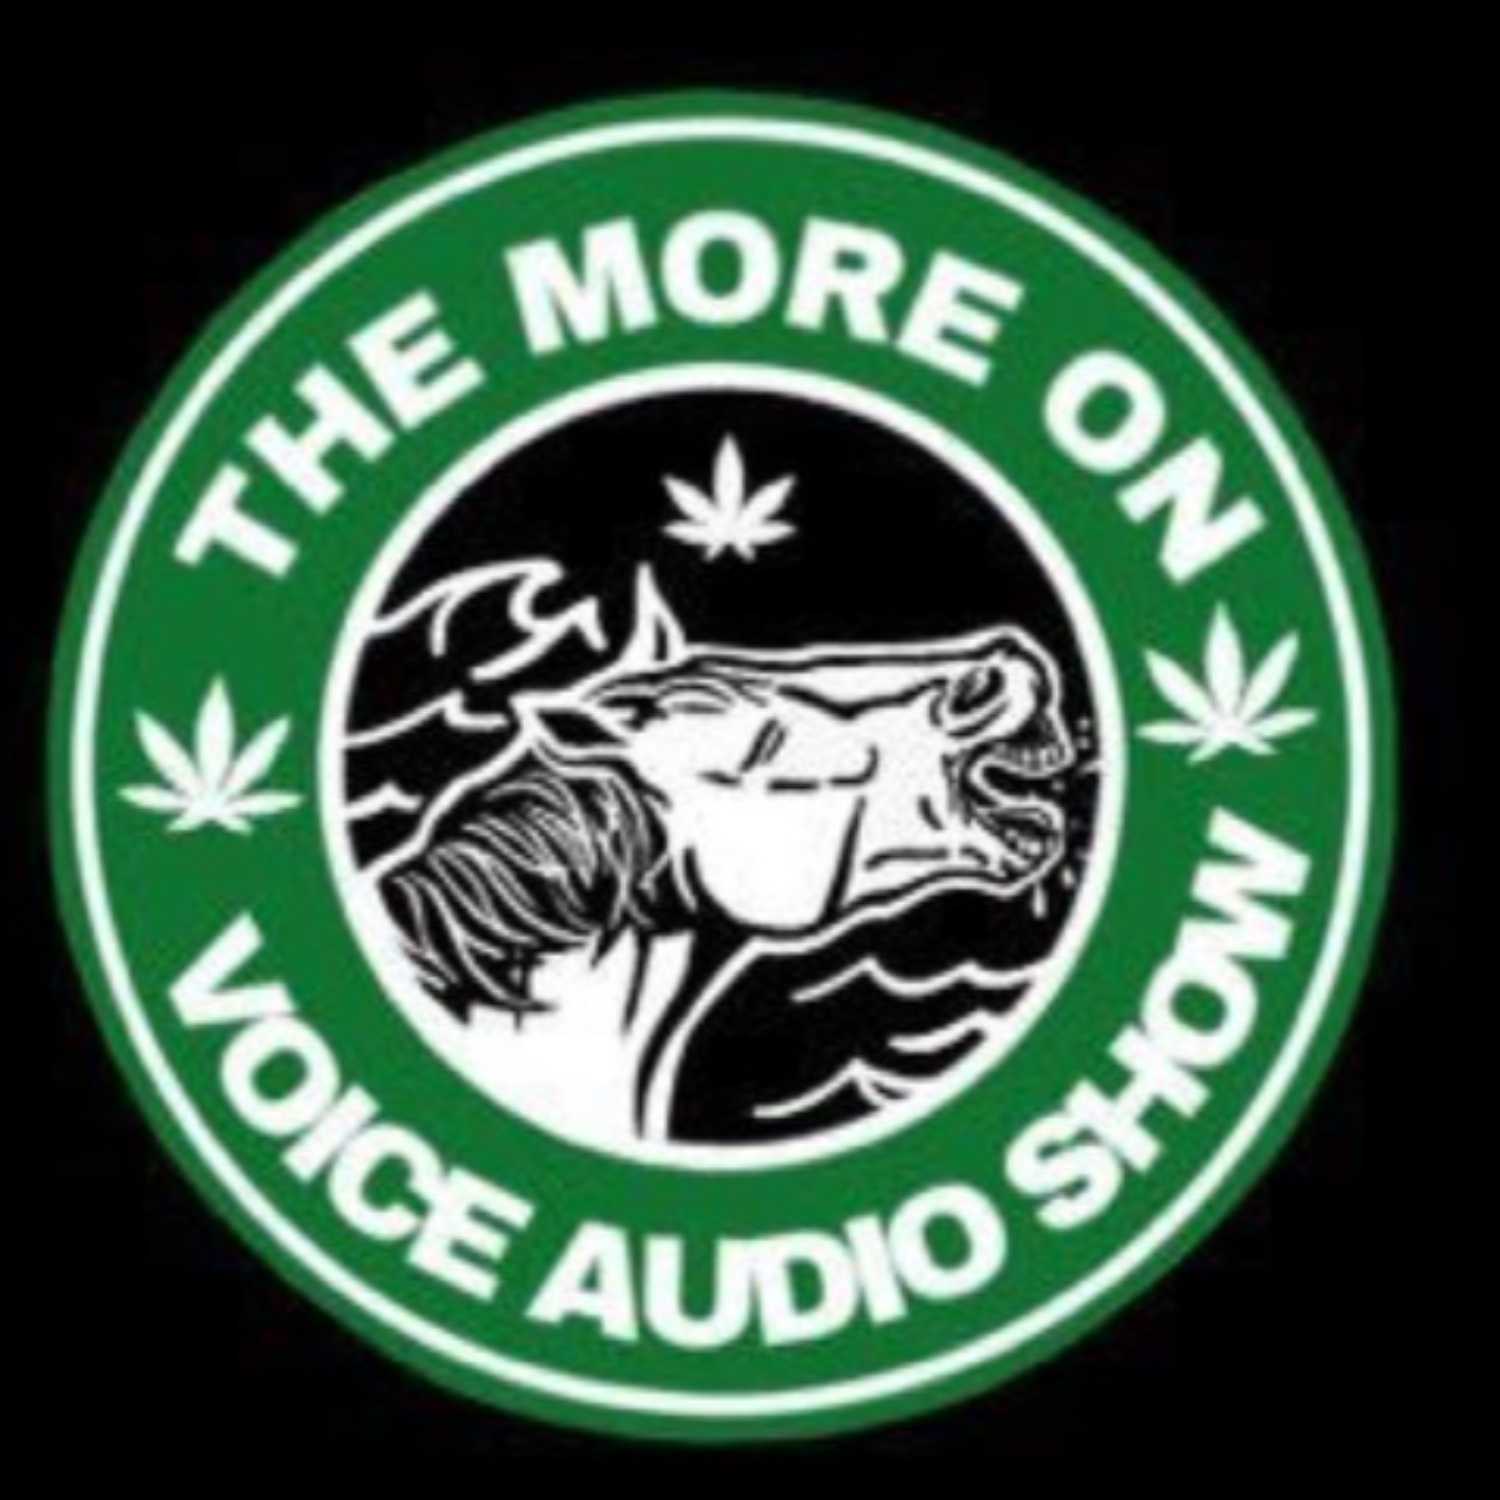 The More on Voice Audio Show: Episode 53